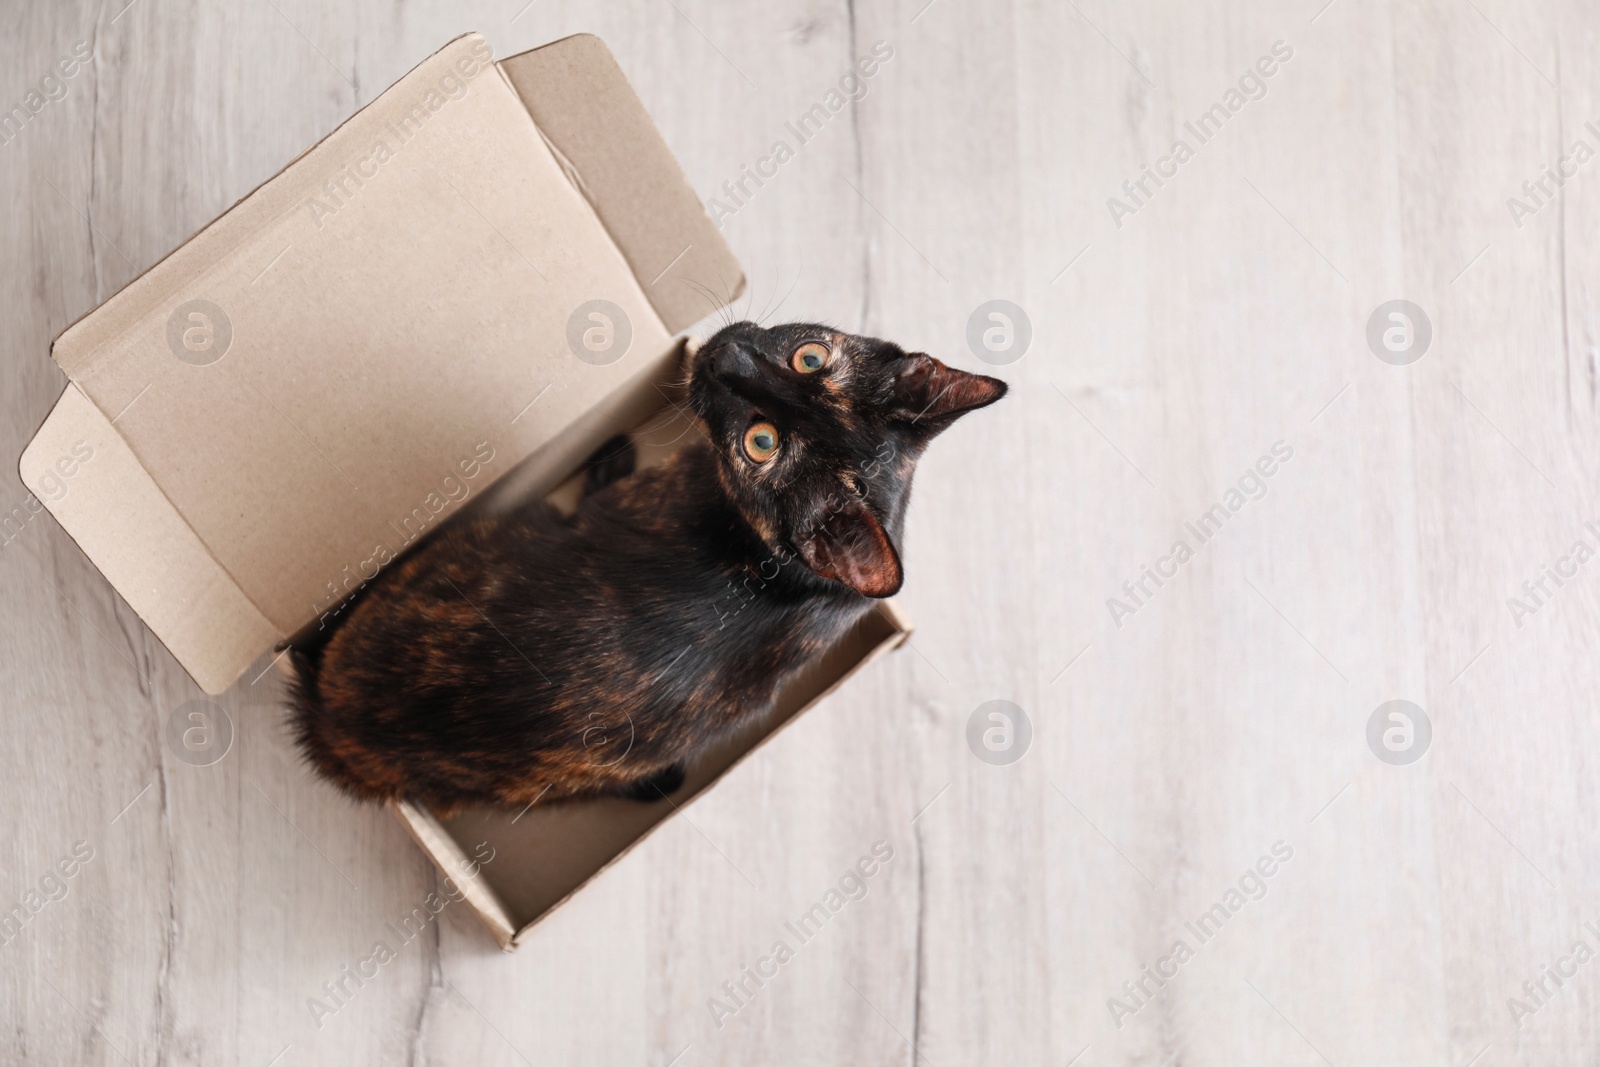 Photo of Cute black cat in cardboard box on floor at home, top view